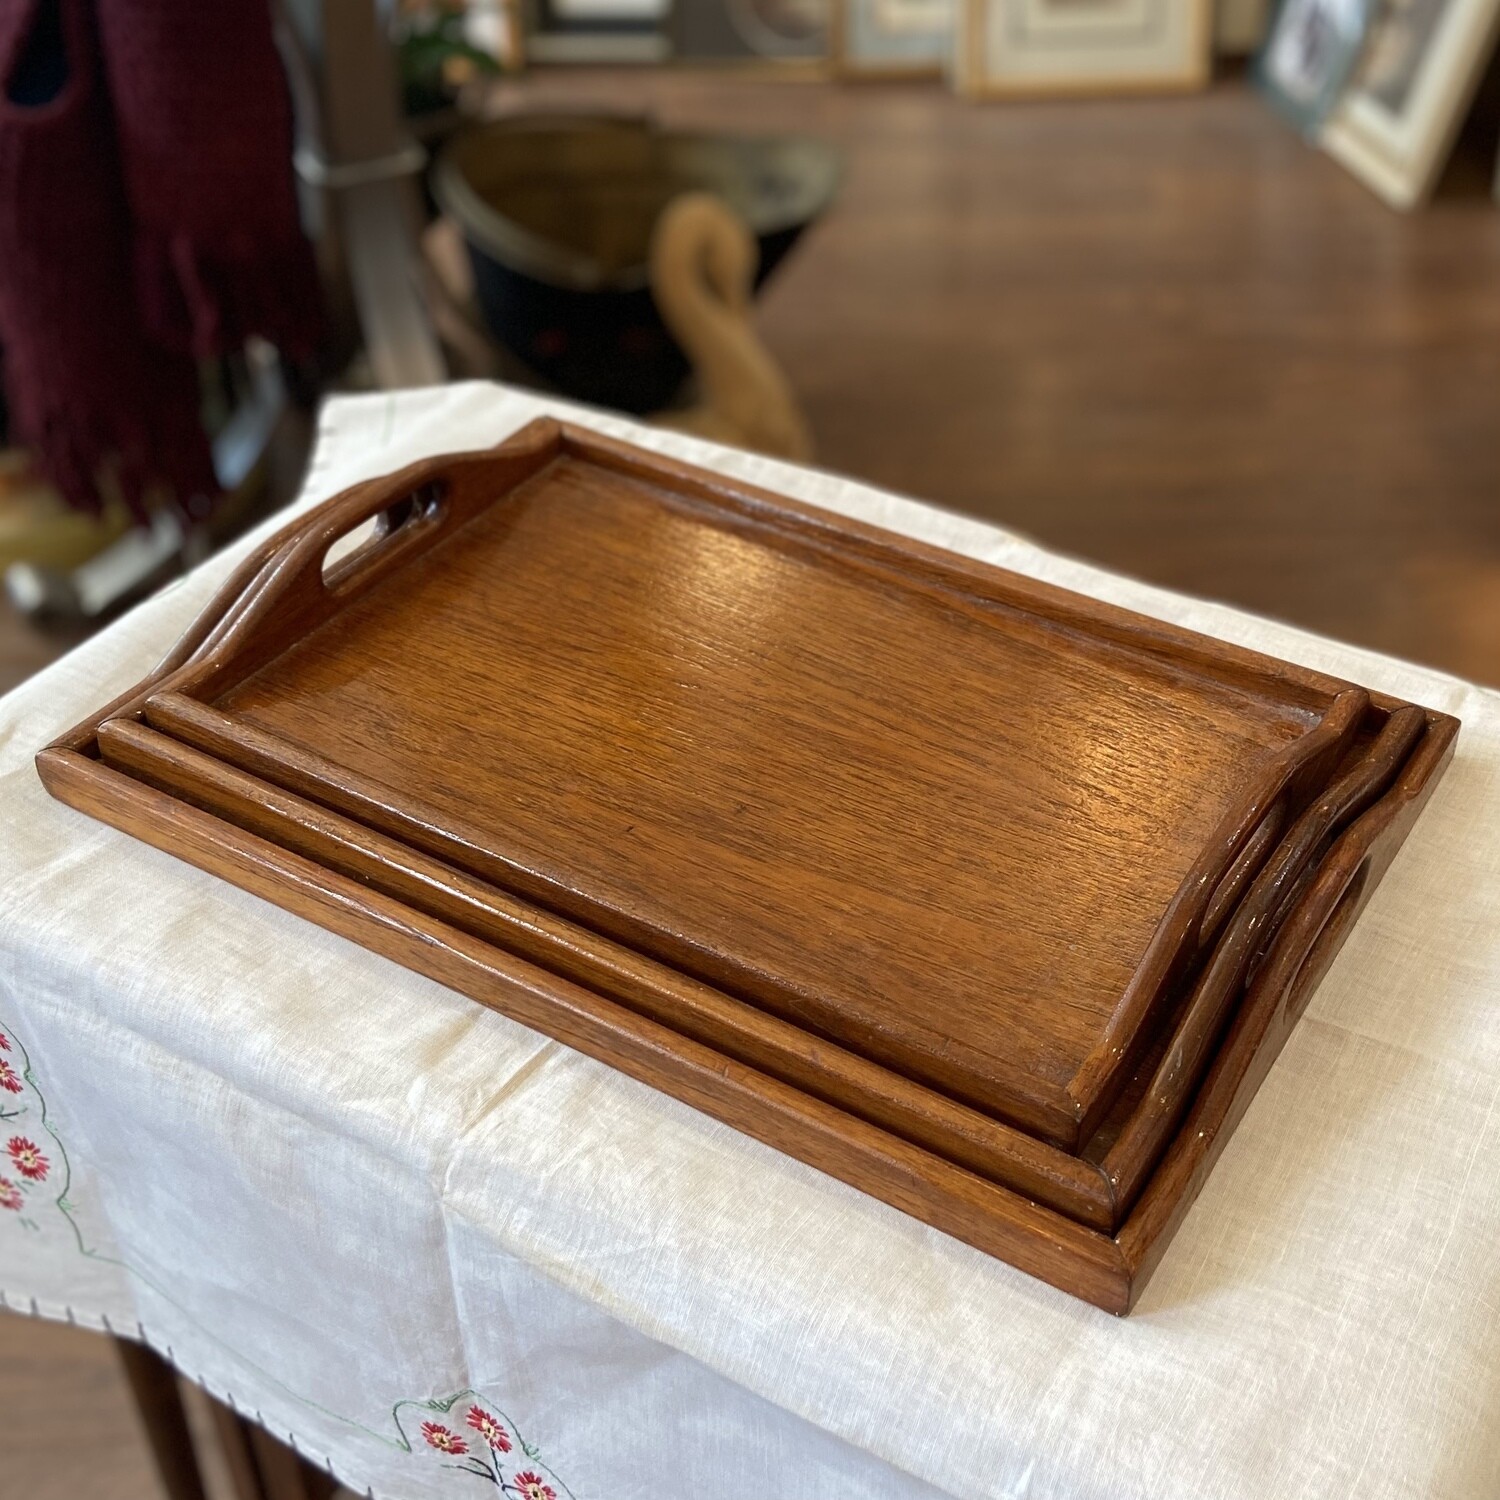 Set of Three Stackable Wooden Serving Trays with Handles